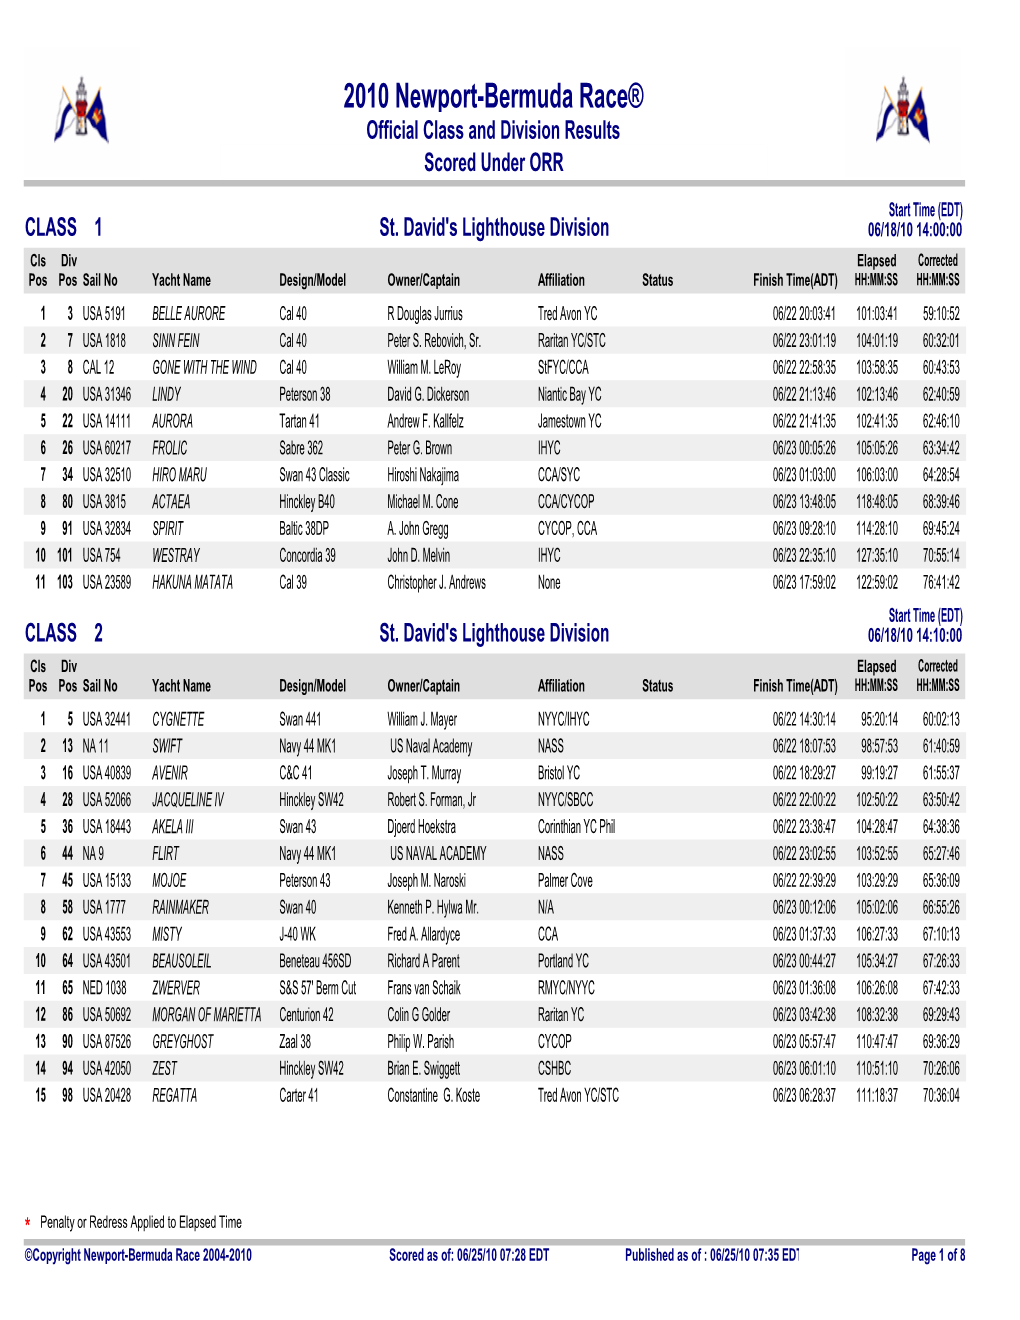 2010 Newport-Bermuda Race® Official Class and Division Results Scored Under ORR